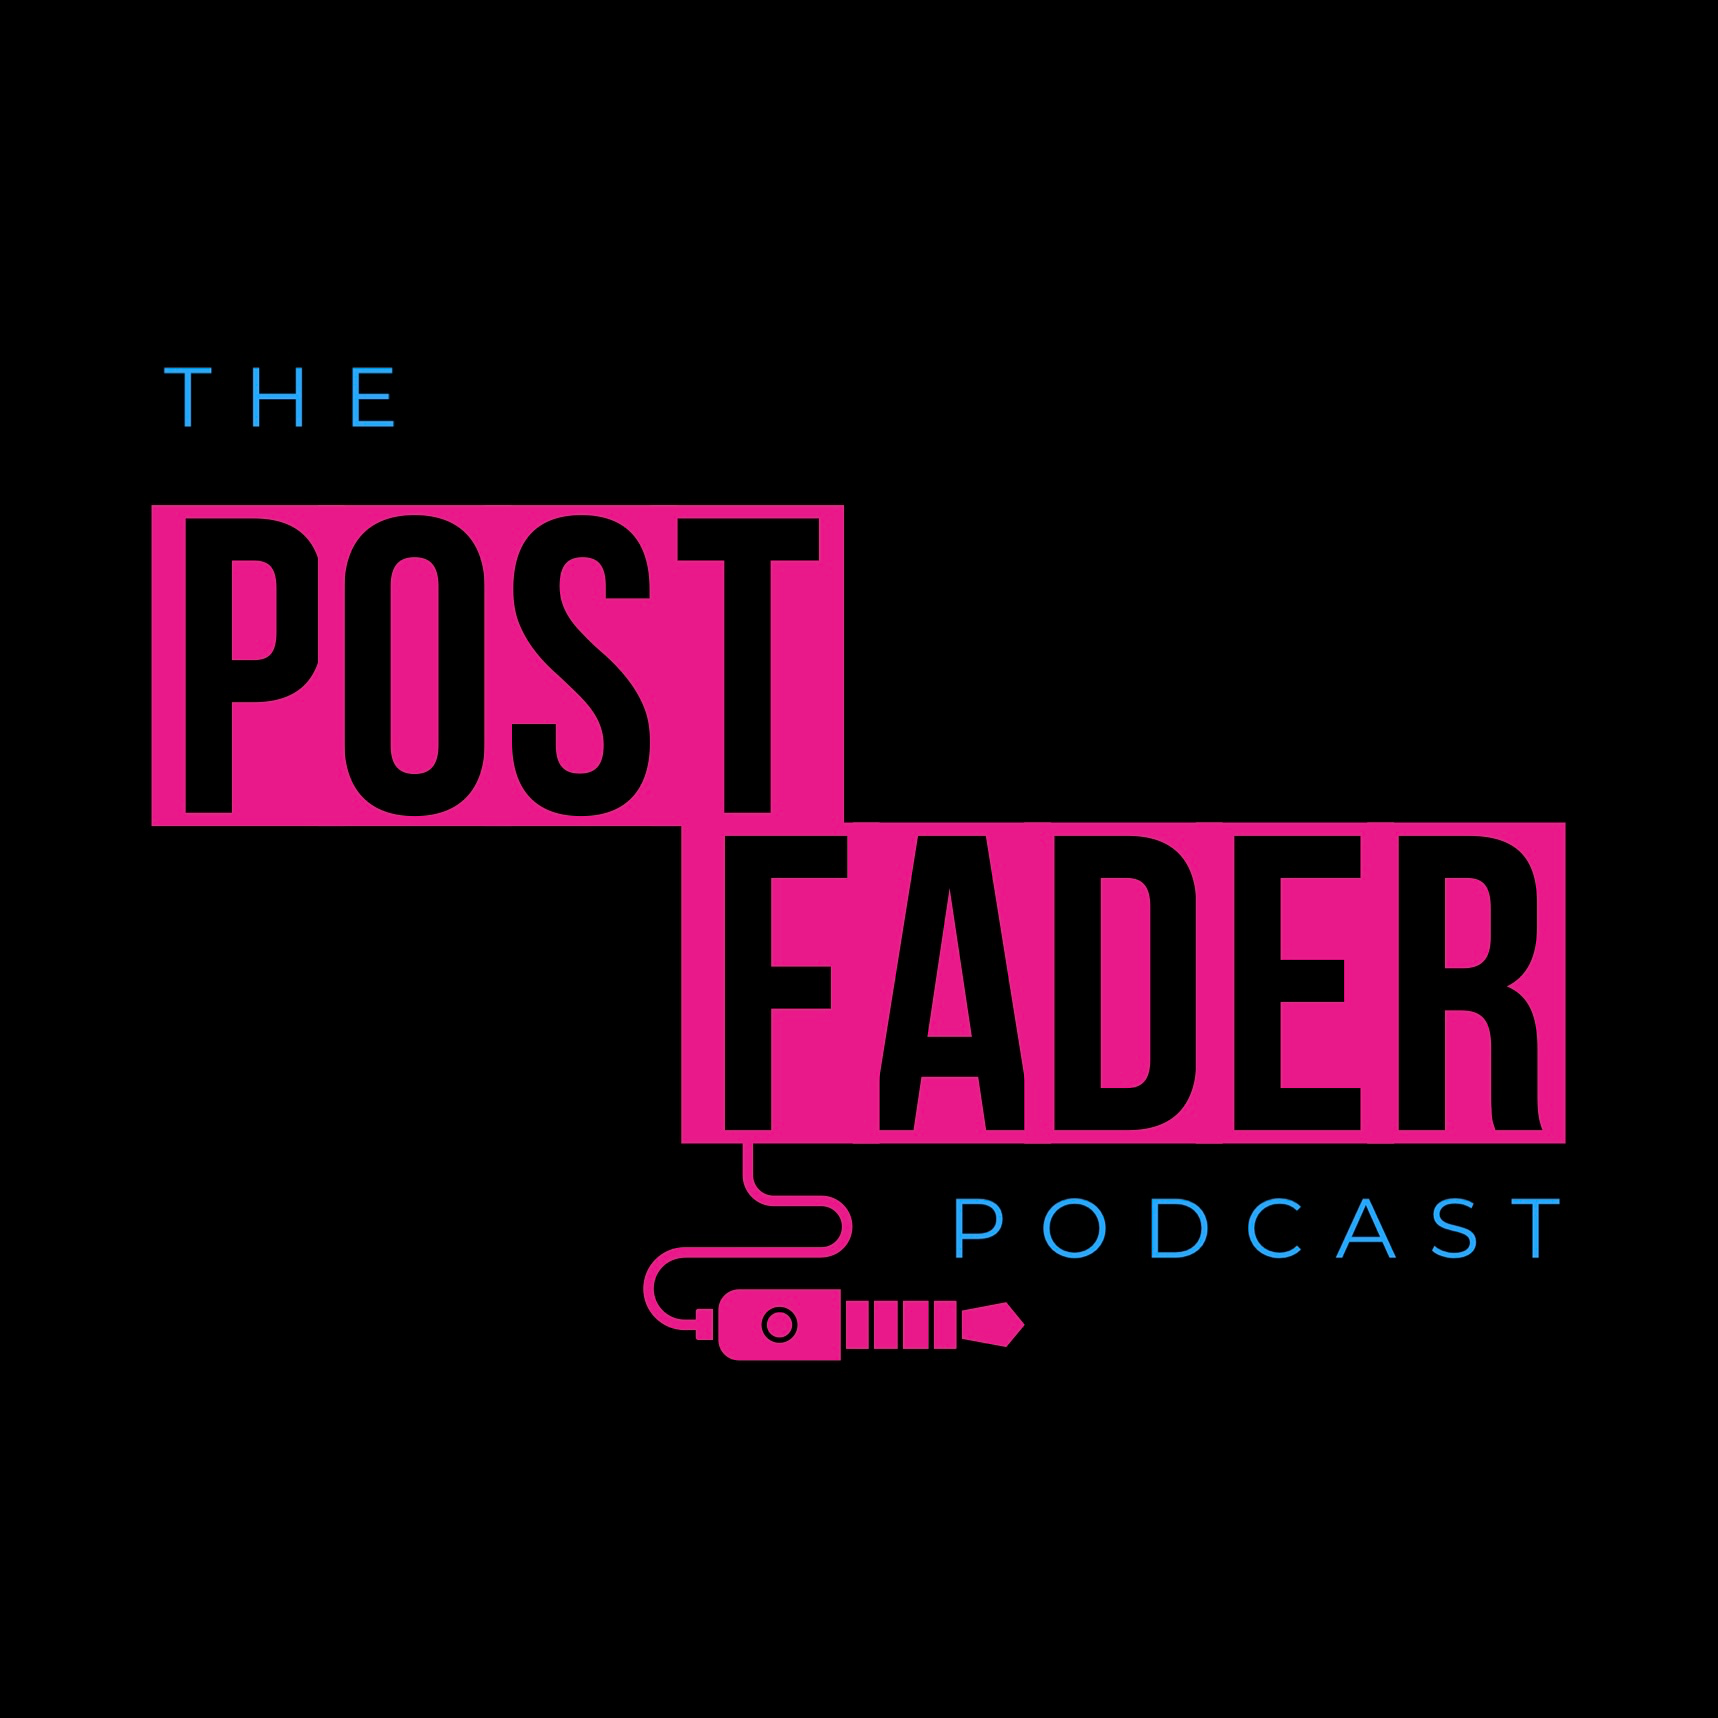 The Post Fader Podcast